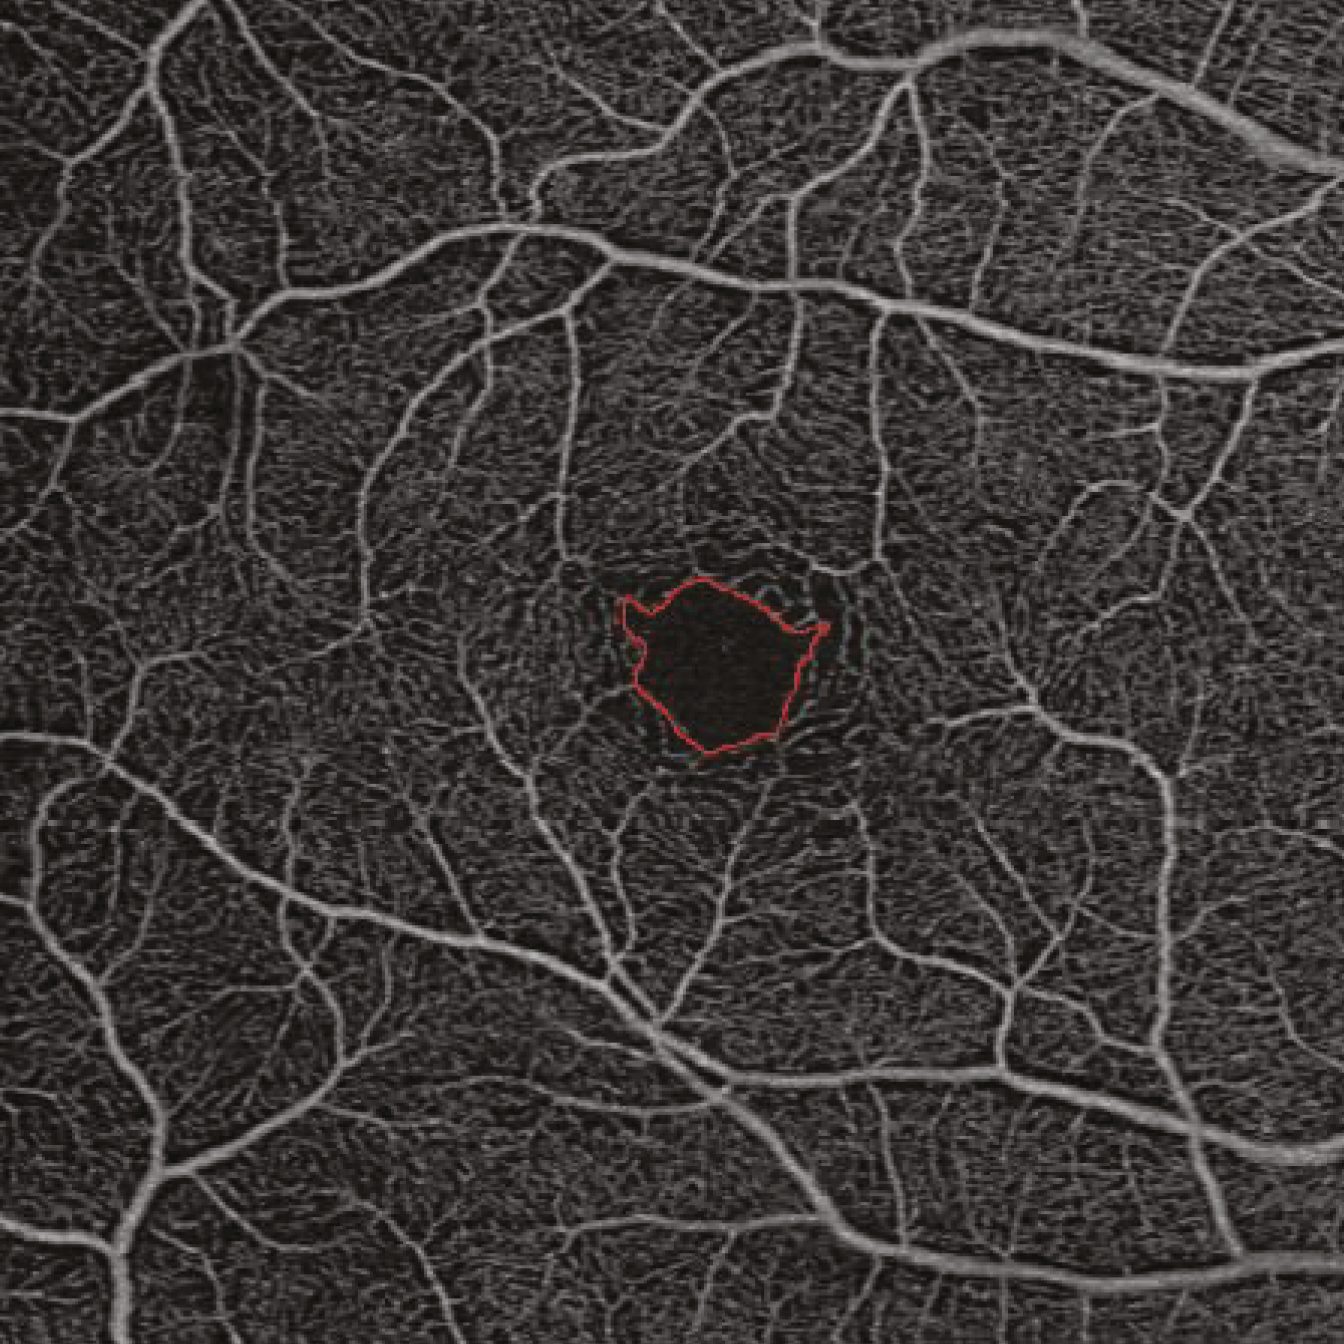 The added sensitivity provided by SS-OCT angiography may enable pre-clinical identification of diabetic eye disease, this study suggests.